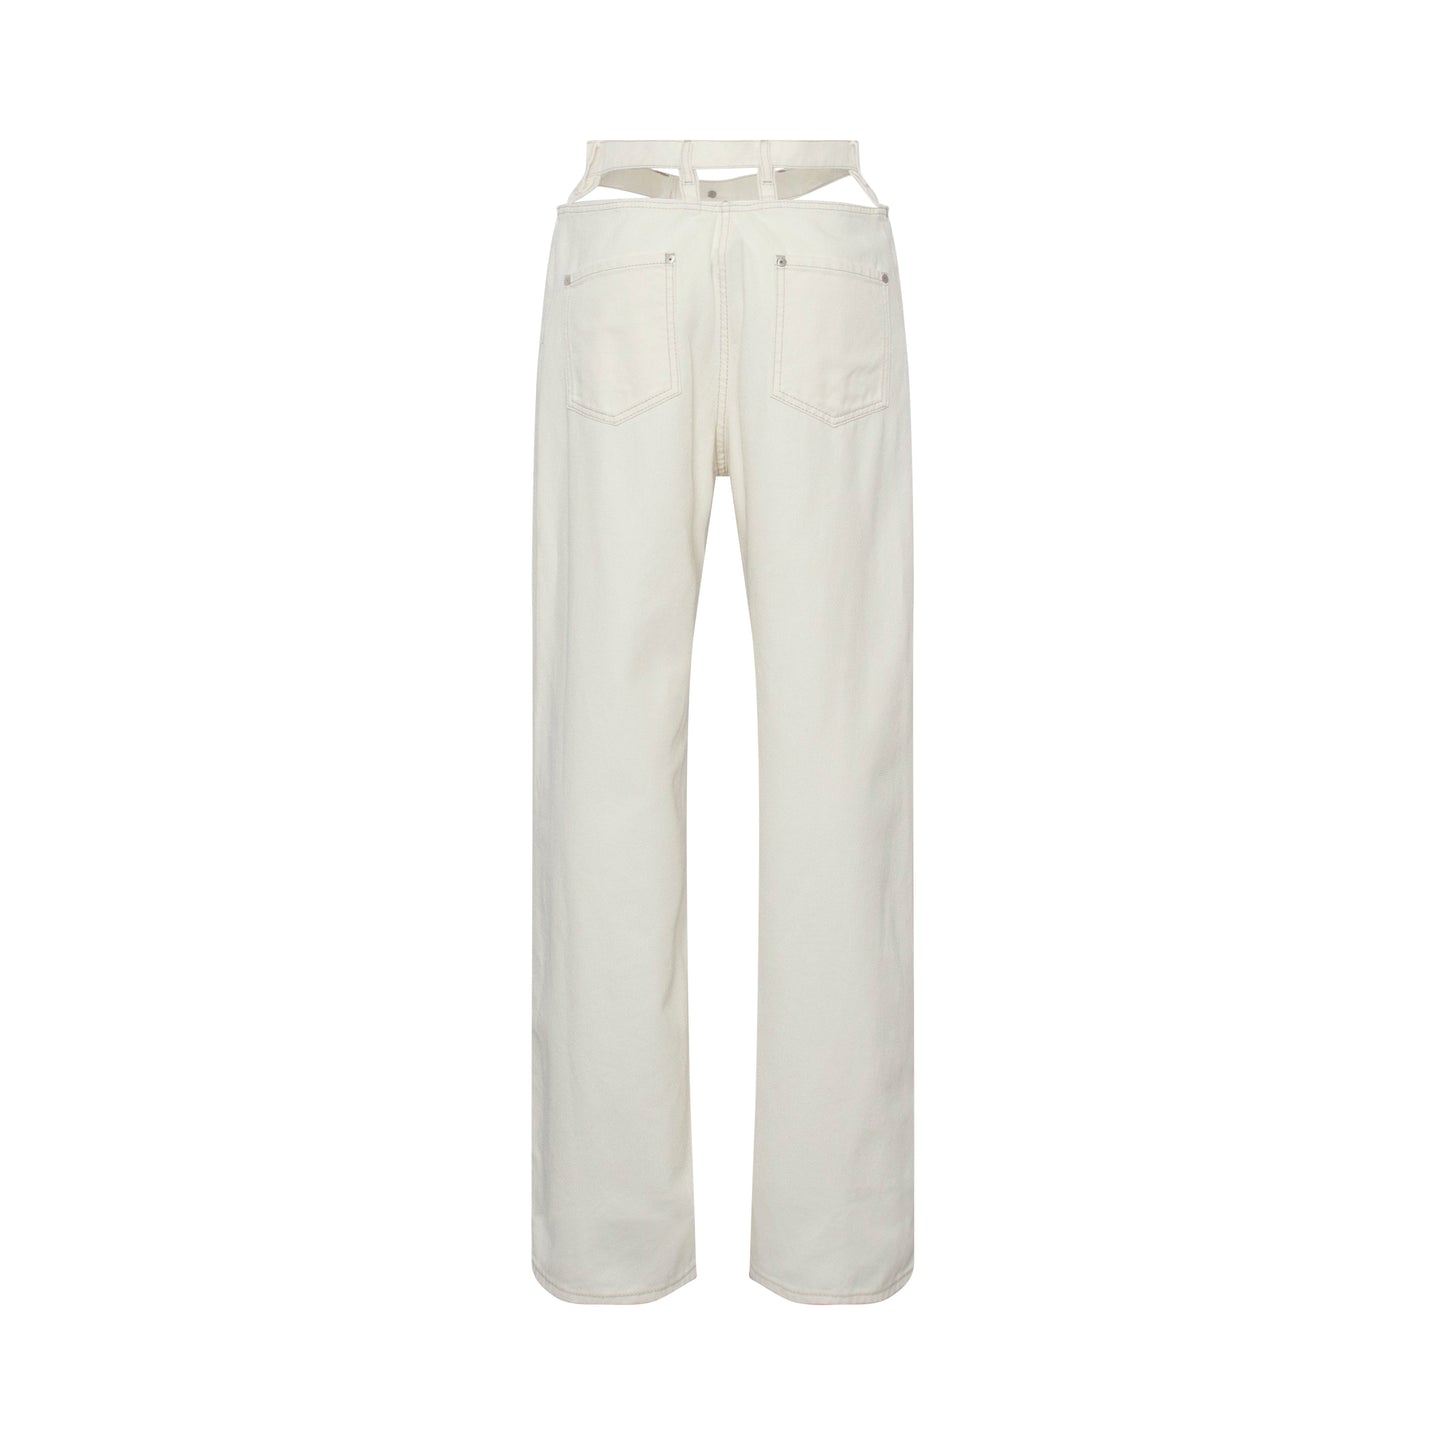 Decortique Cut Out Jeans in White